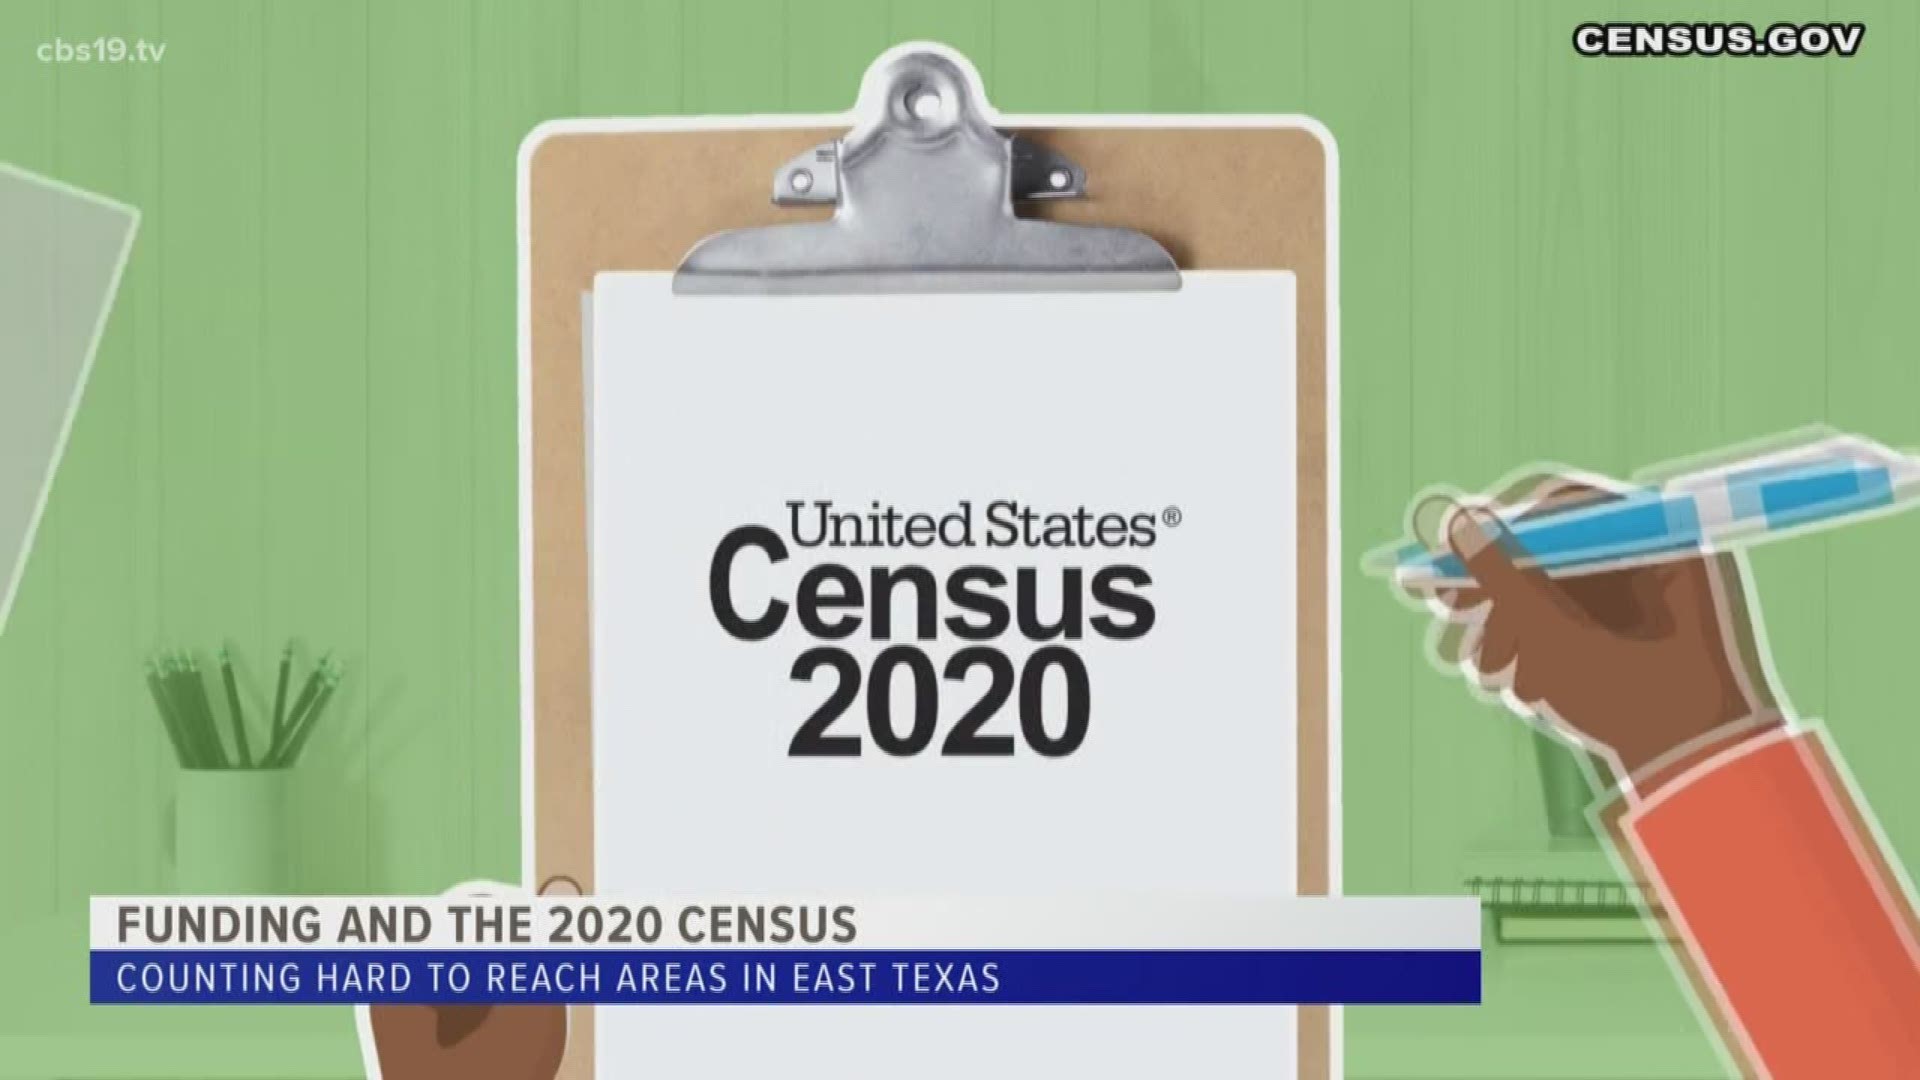 With the census fast approaching, here are the facts you need to know.